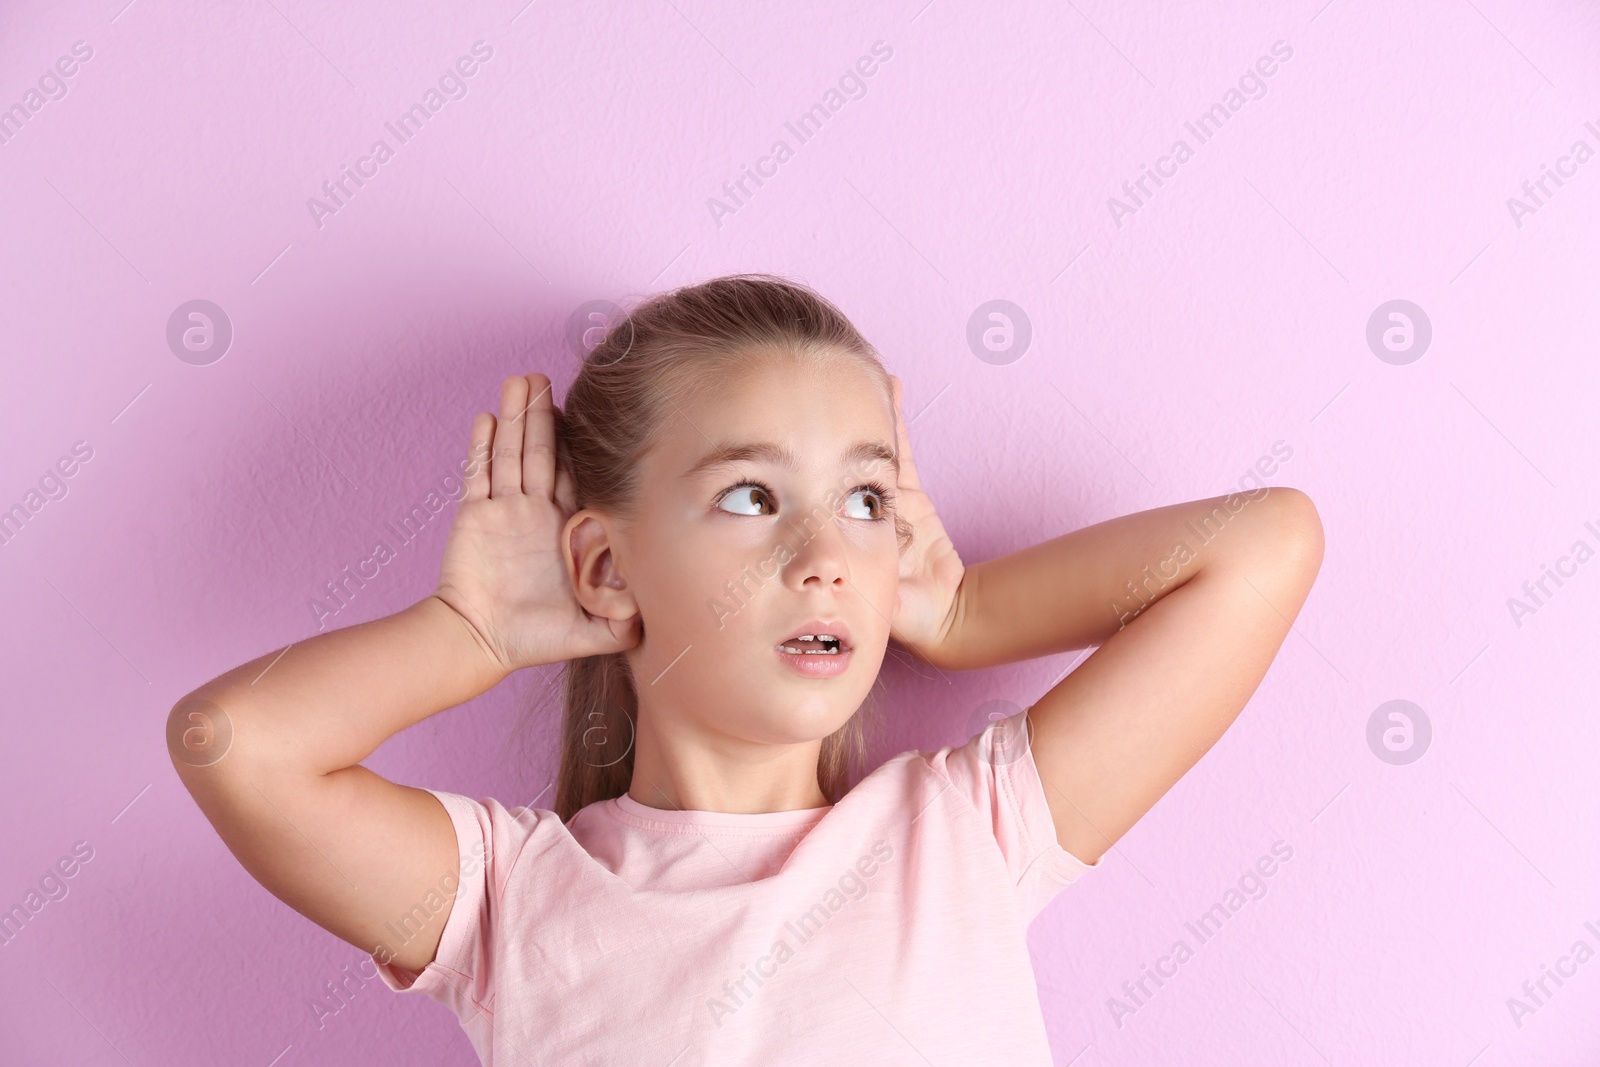 Photo of Cute little girl with hearing problem on color background